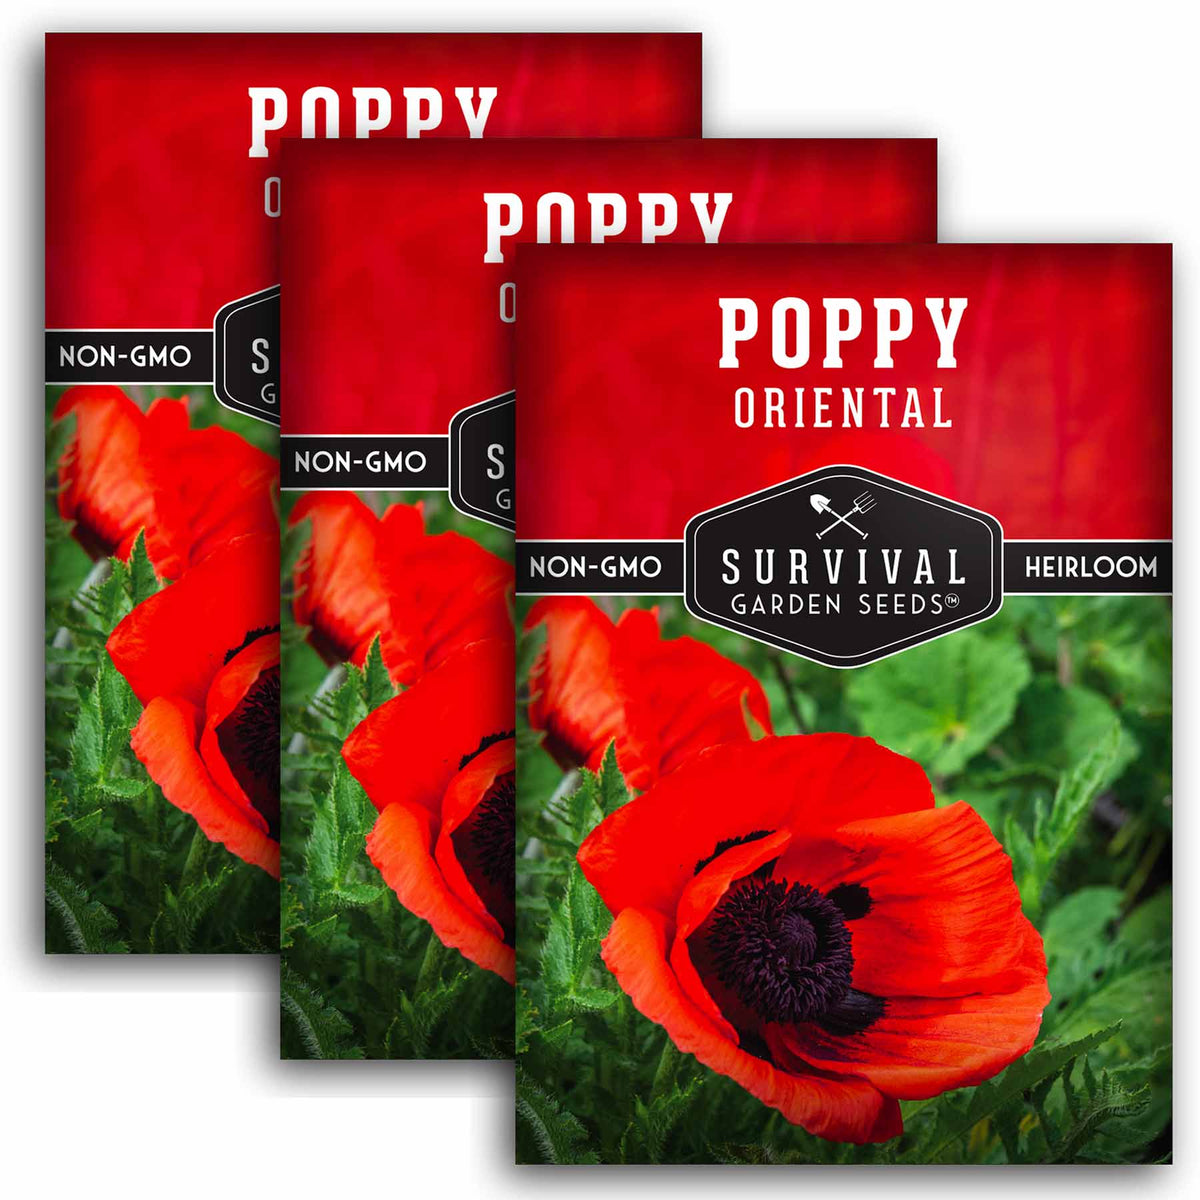 3 packets of Orient Poppy seeds